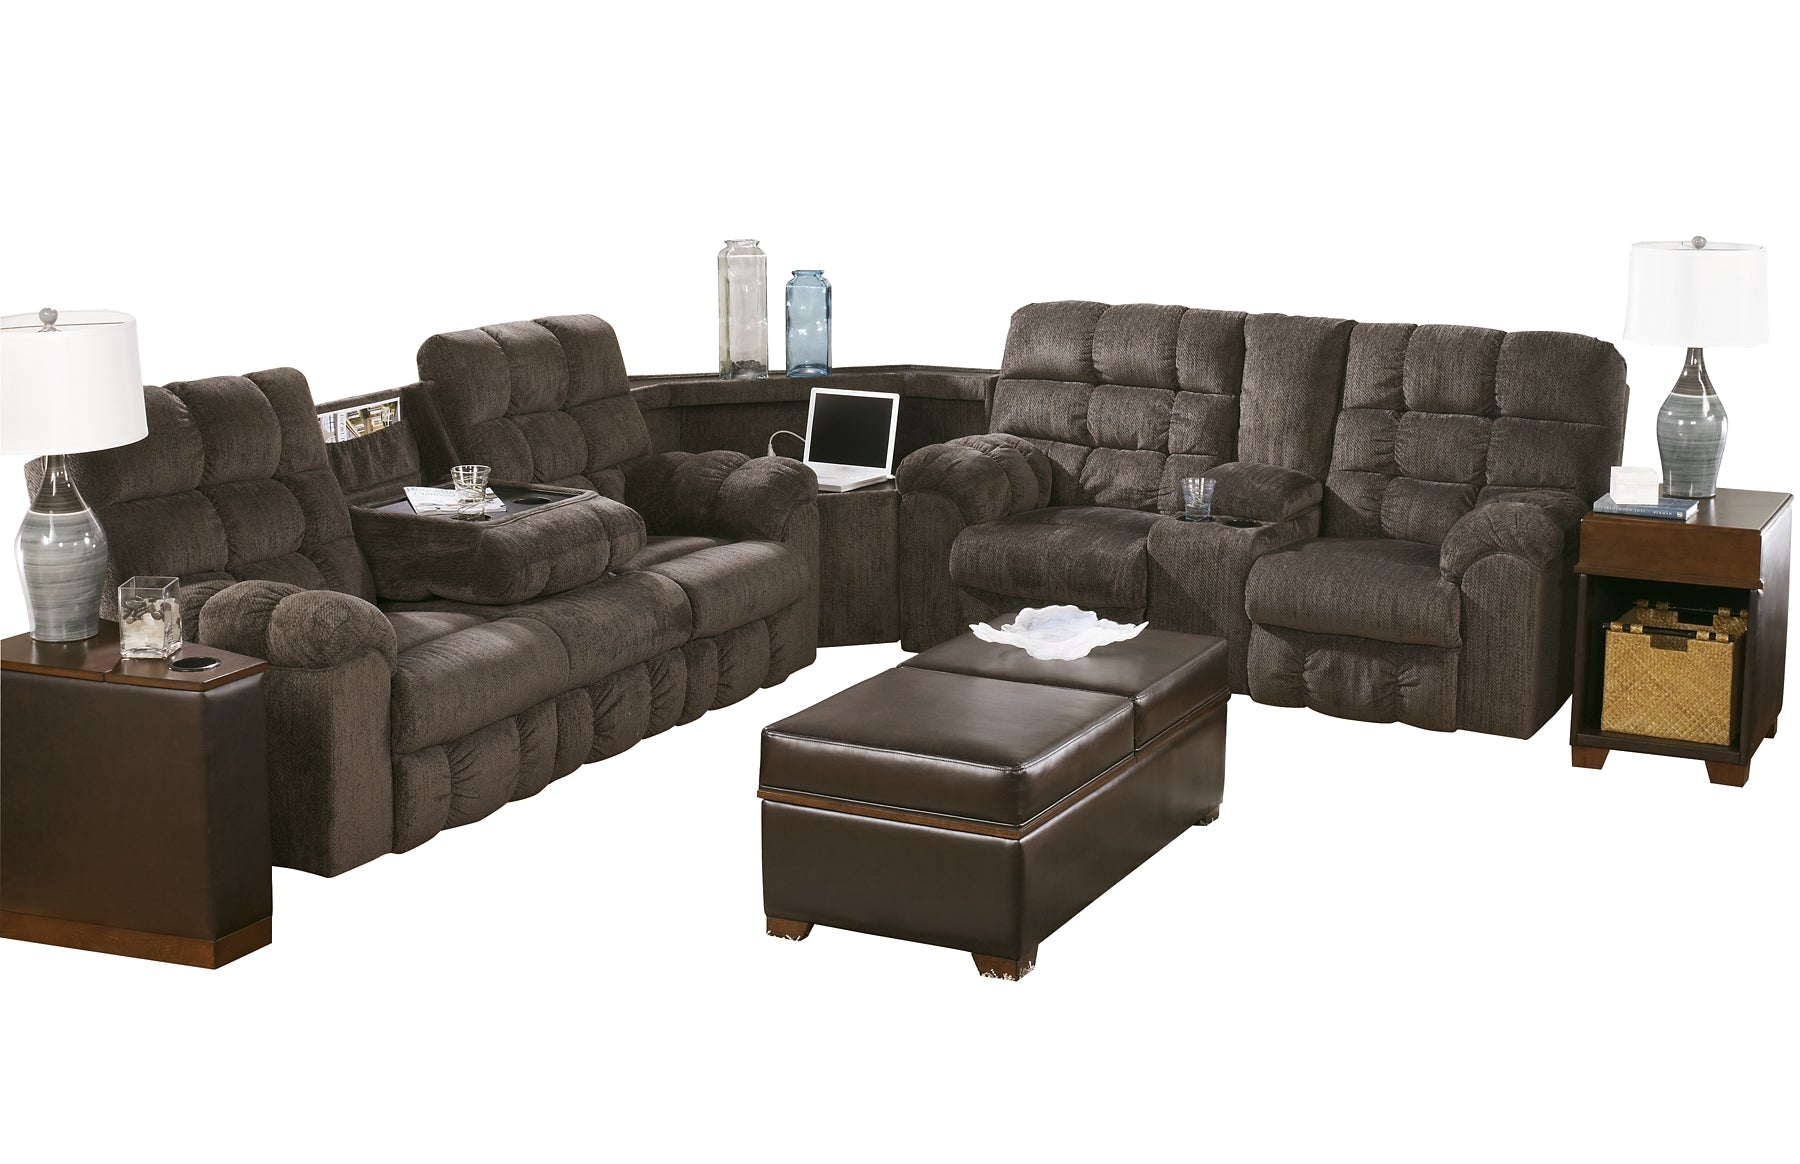 Acieona 3-Piece Reclining Sectional Rent Wise Rent To Own Jacksonville, Florida